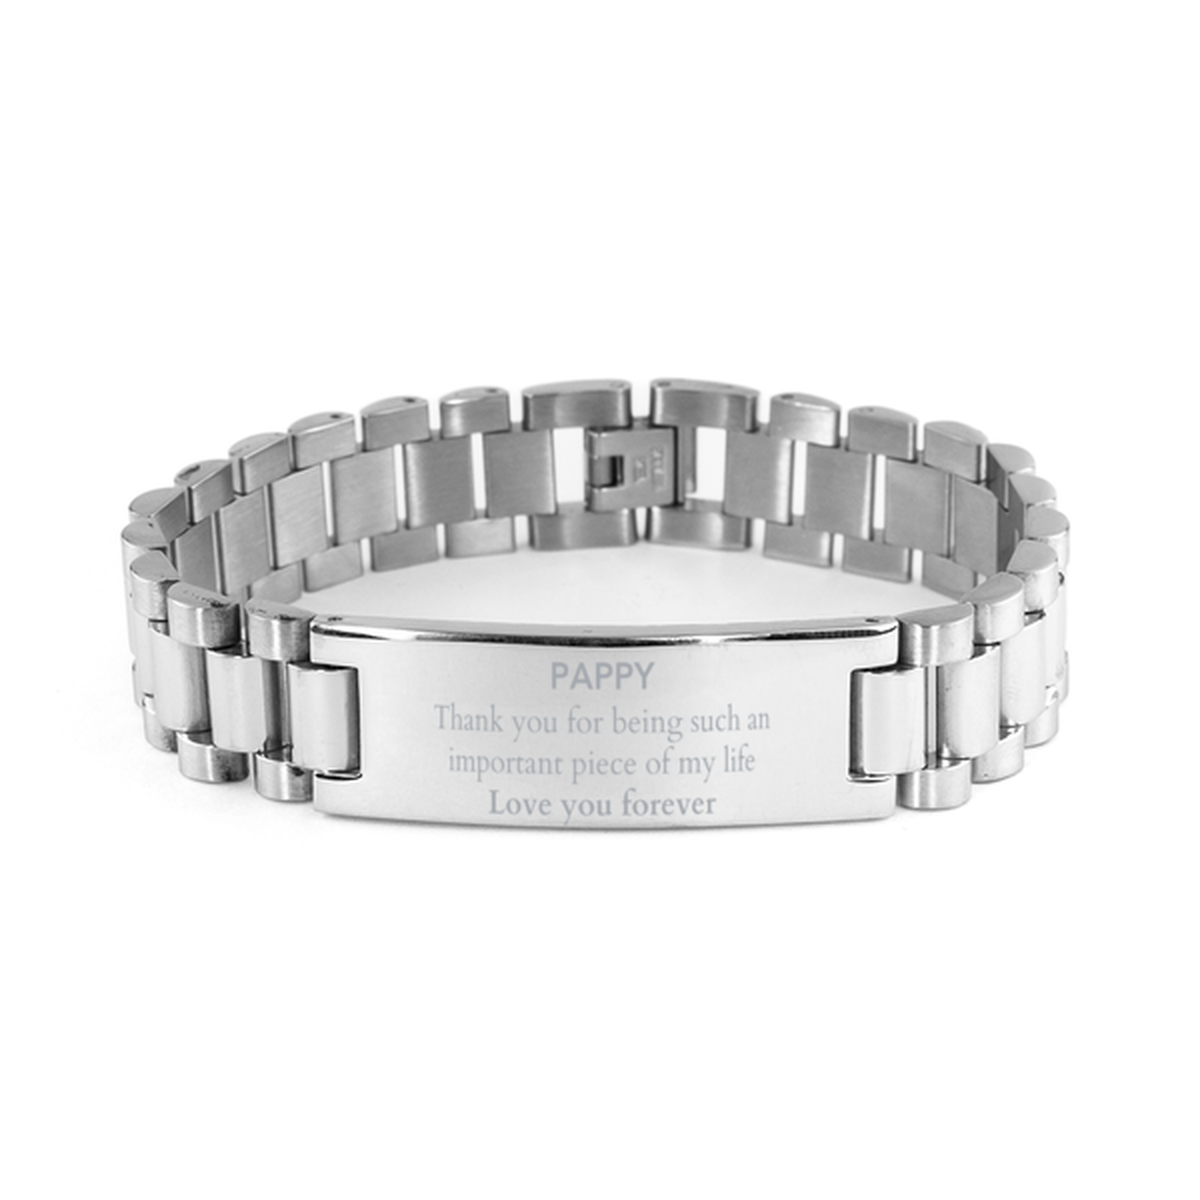 Appropriate Pappy Ladder Stainless Steel Bracelet Epic Birthday Gifts for Pappy Thank you for being such an important piece of my life Pappy Christmas Mothers Fathers Day